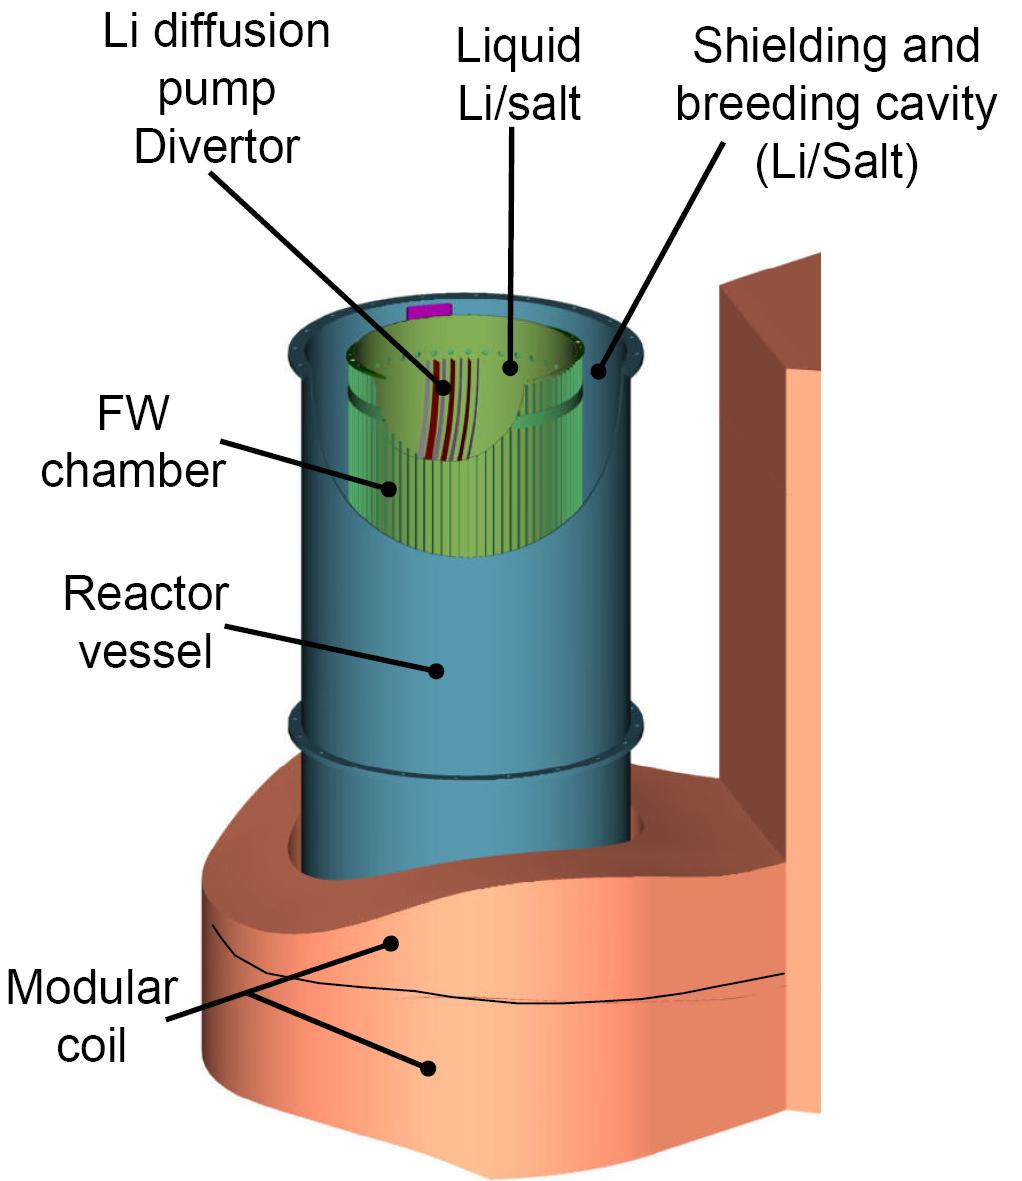 strong magnetic forces. Openings for heating and diagnostics are likewise minimized. The reactor head is composed of coil monolithic sets and the curved section of the double hull.